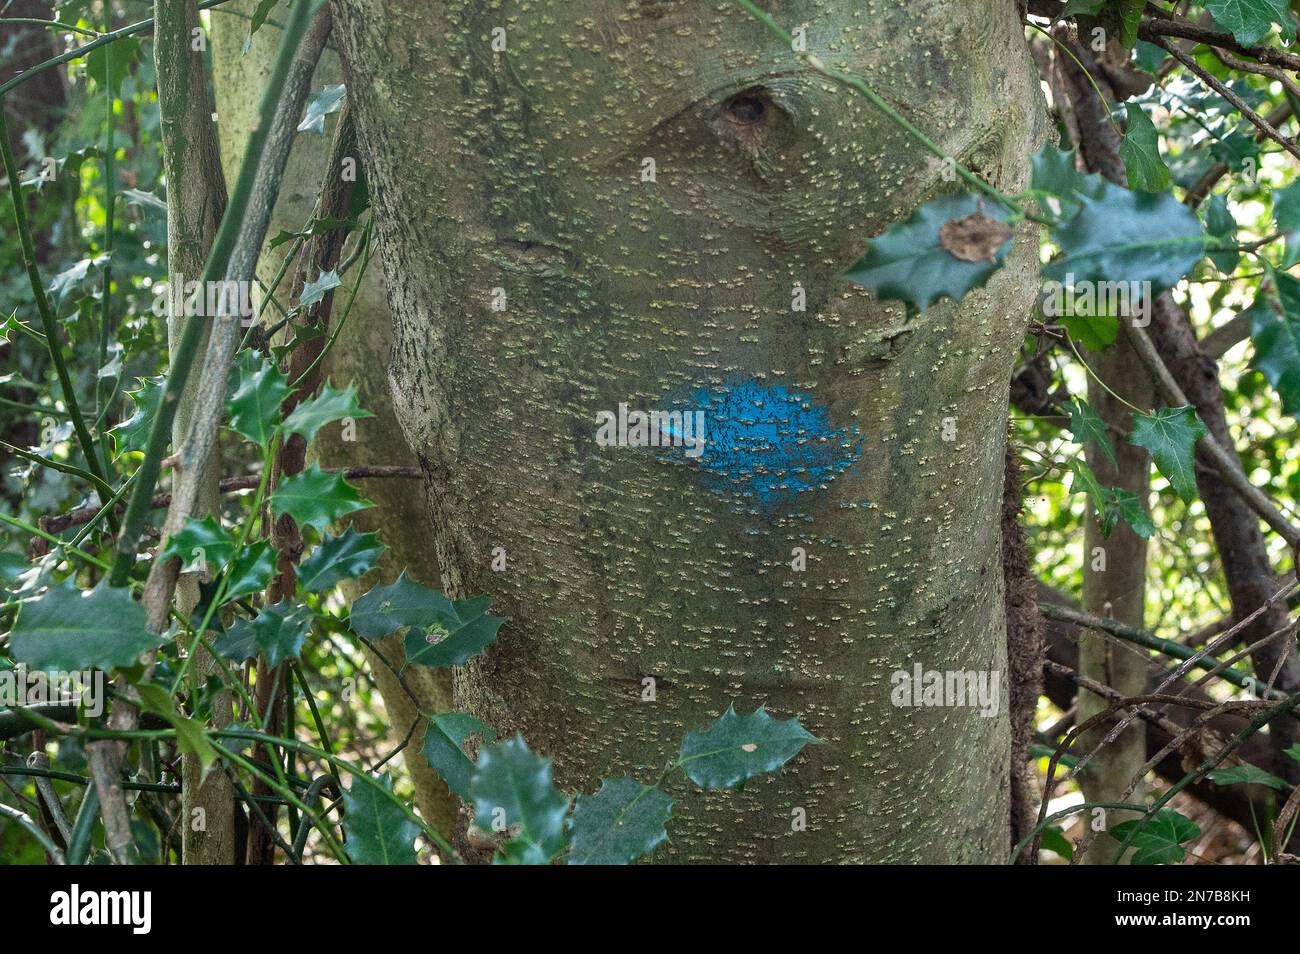 Sunningdale, Ascot, Berkshire, UK. 10th February, 2023. The all too familiar sight of trees marked for felling in woodland that is for sale for property development despite a blanket tree preservation being on the site. Credit: Maureen McLean/Alamy Stock Photo